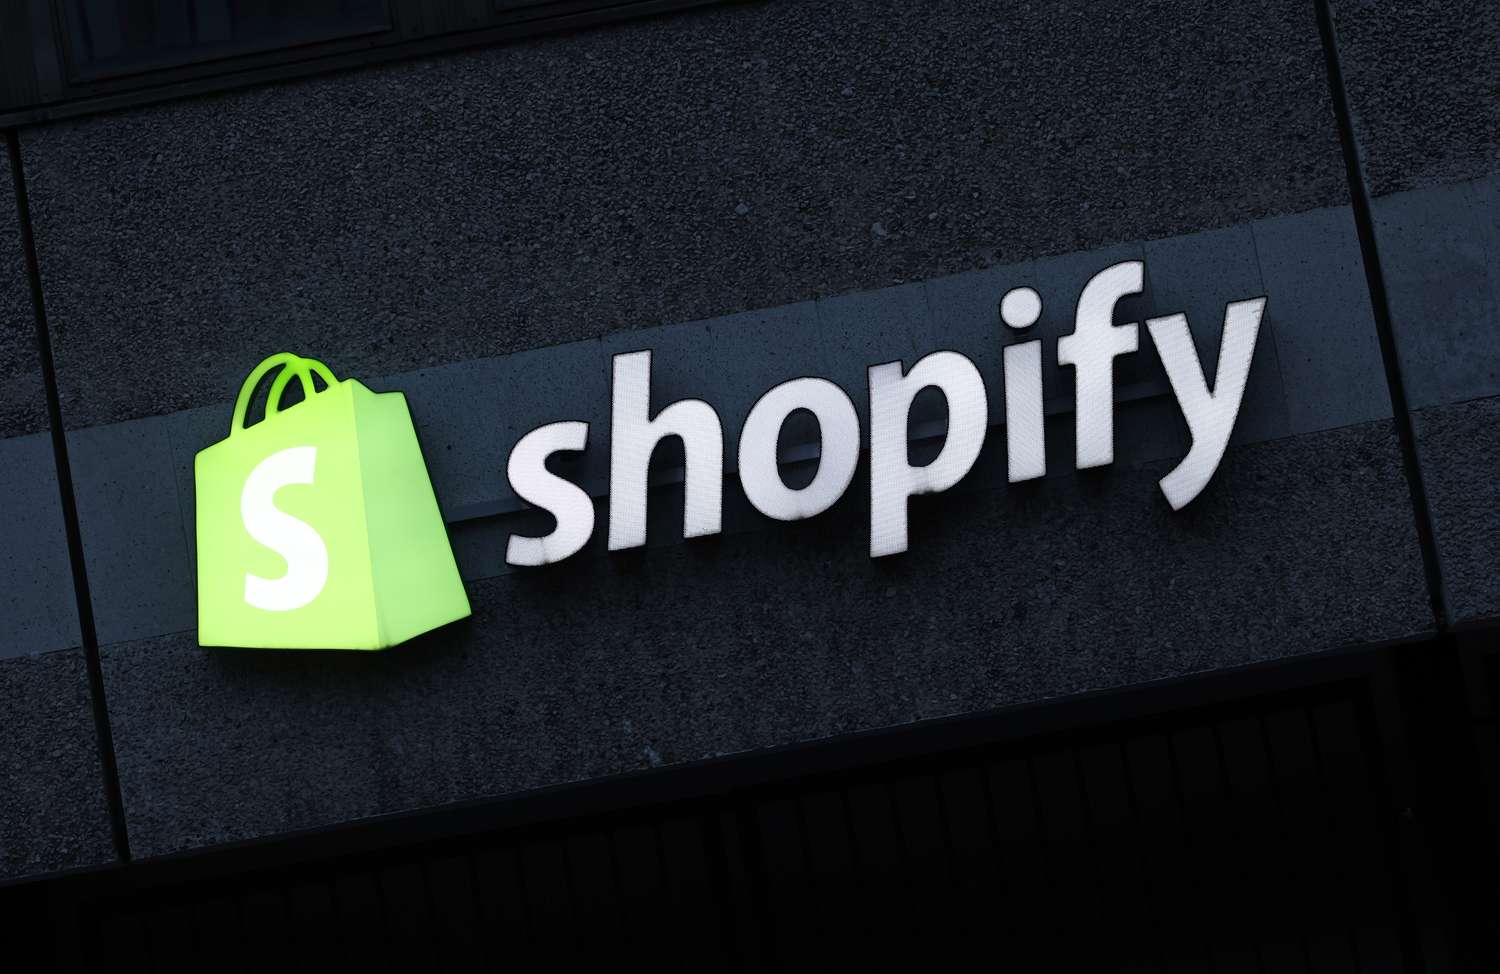 Shopify Stock Sinks on Disappointing Guidance [Video]